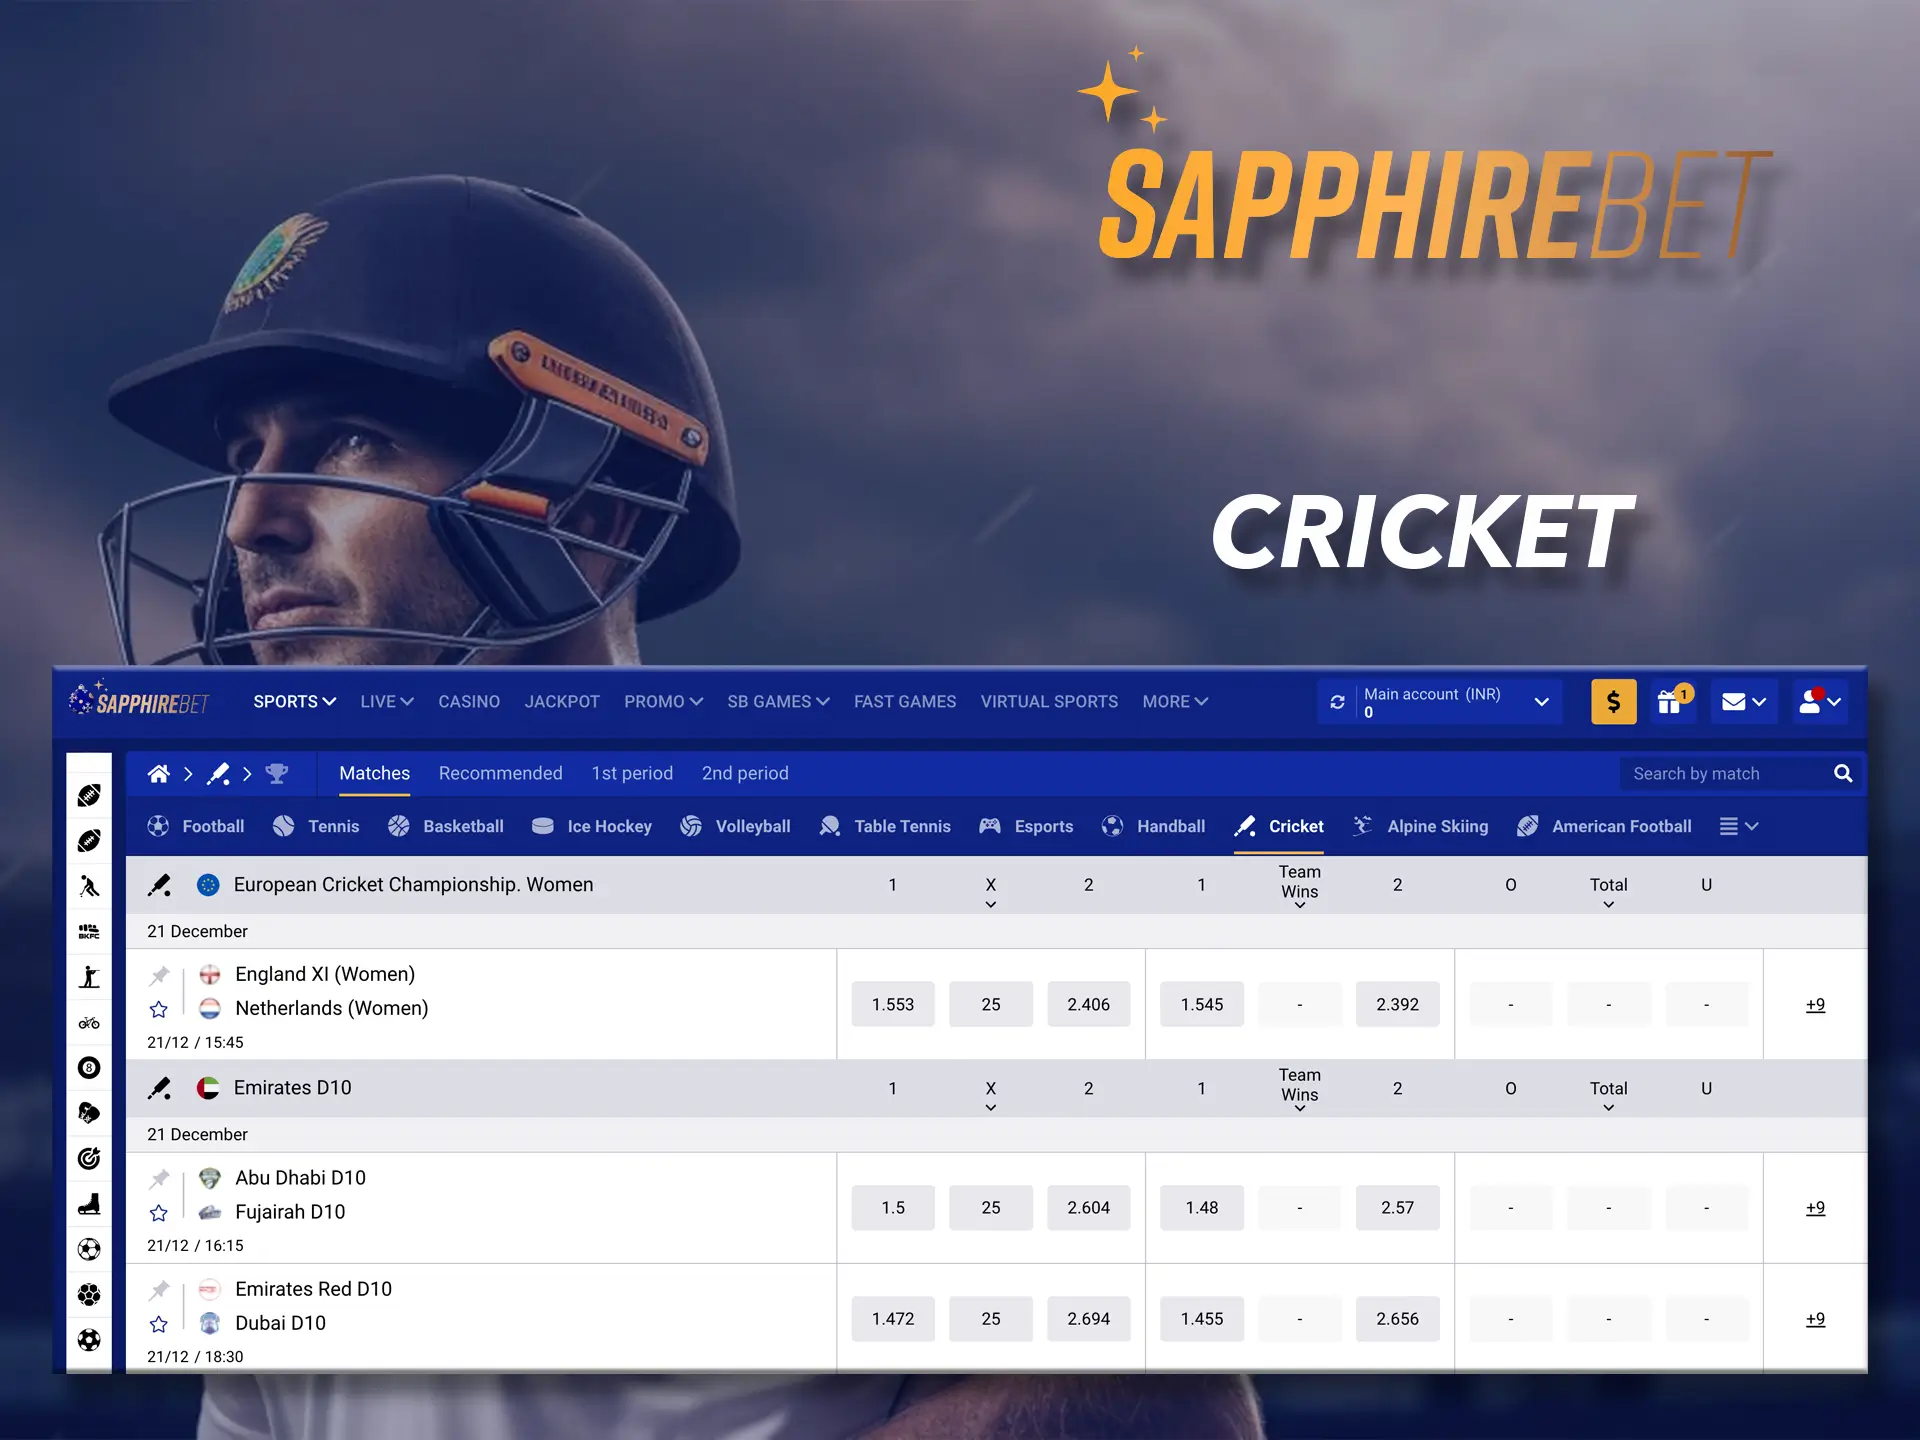 Place your bets at Sapphirebet on your favourite cricket team.